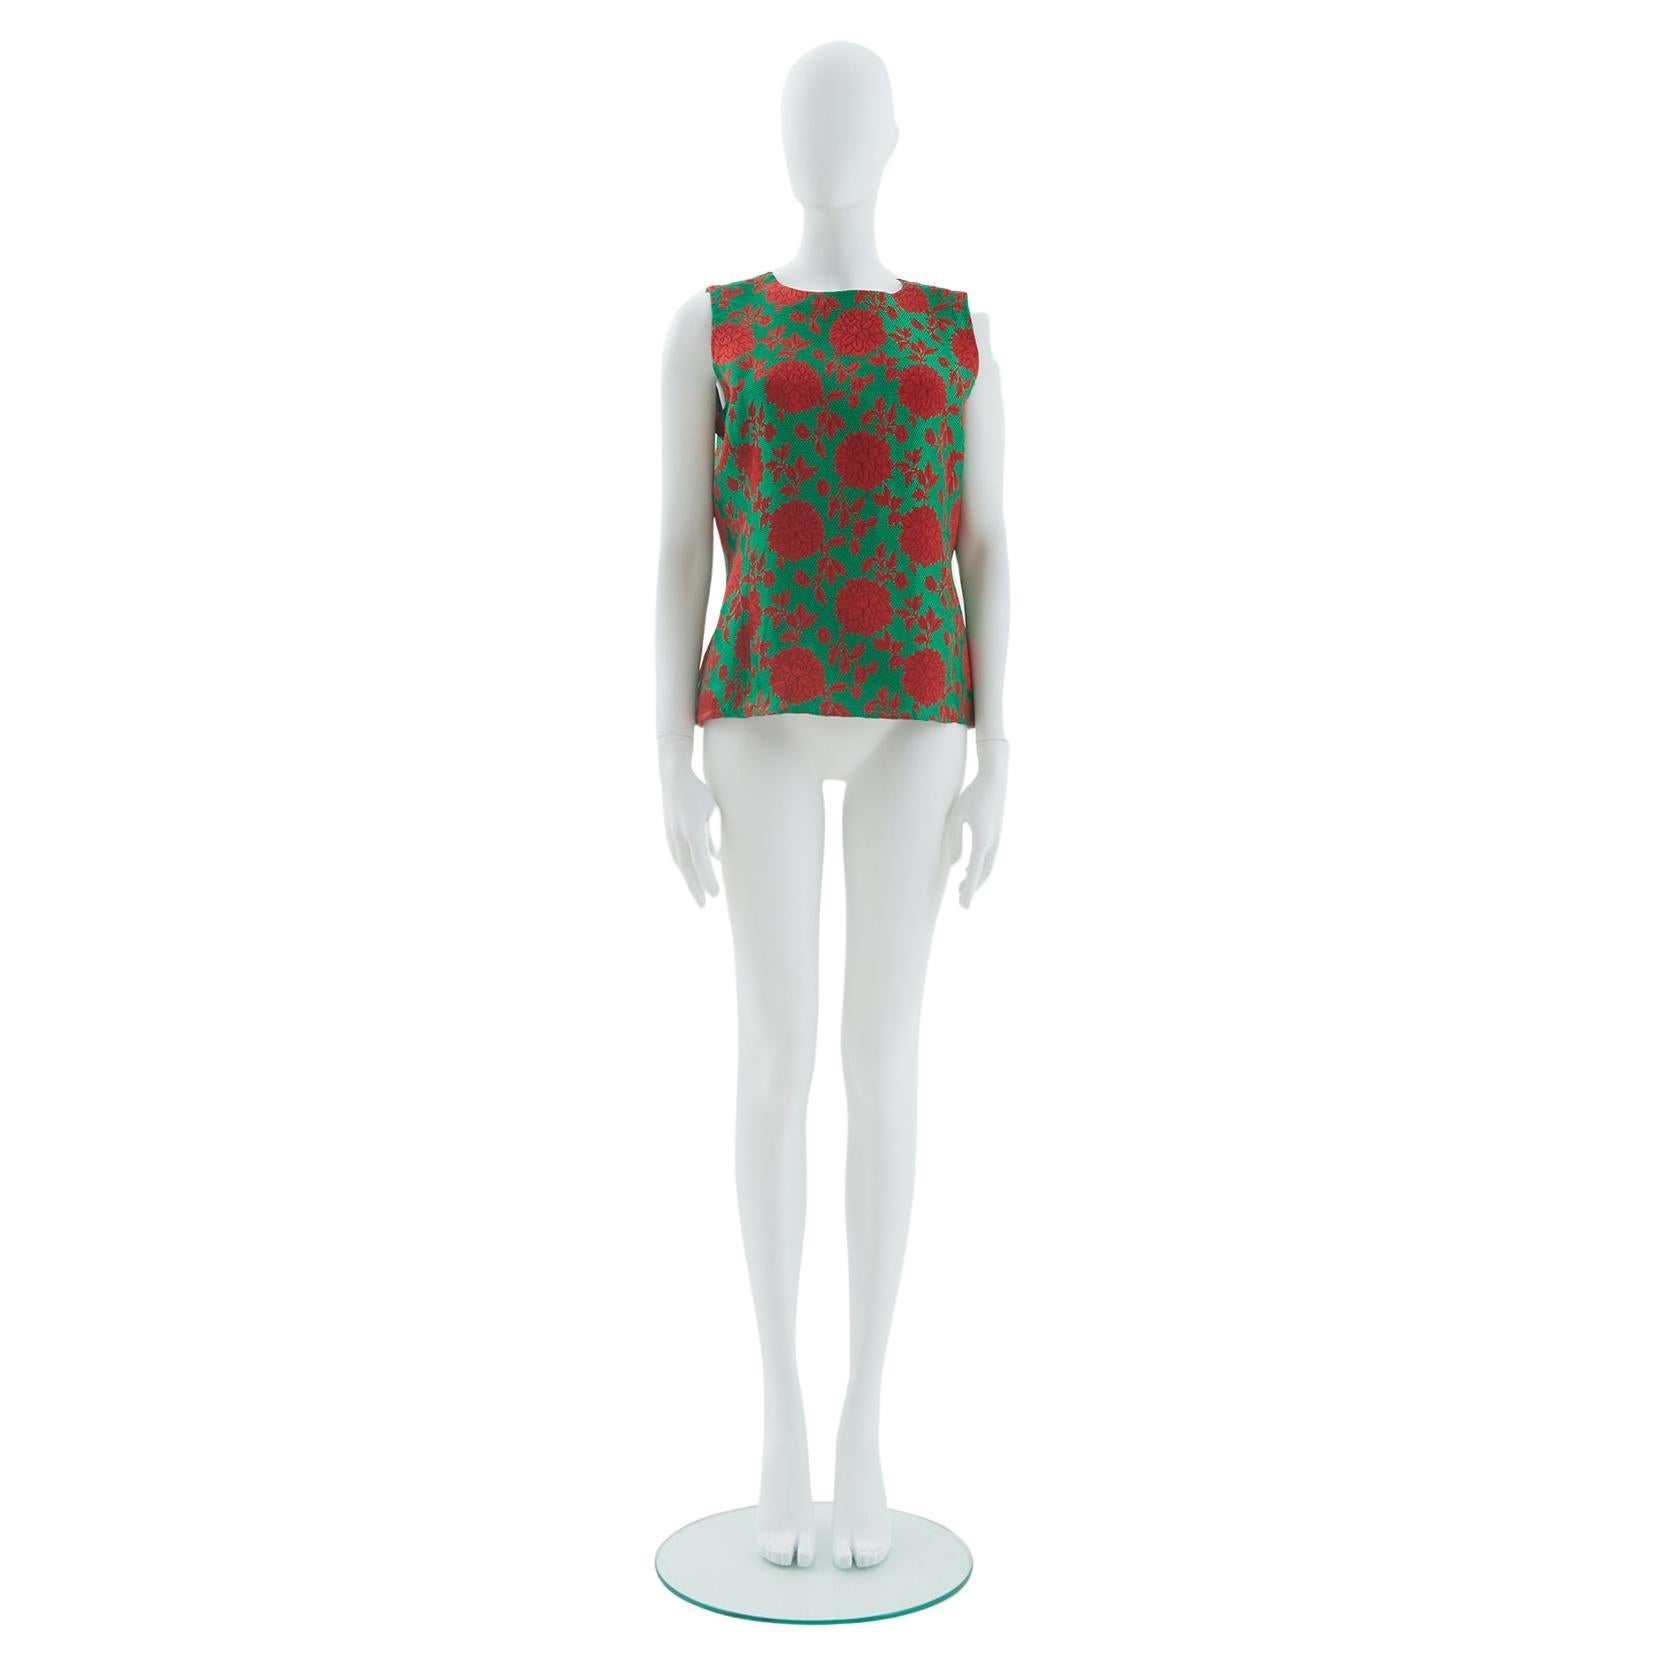 Yves Saint Laurent F/W 1991 Green and red sleeveless floral top For Sale